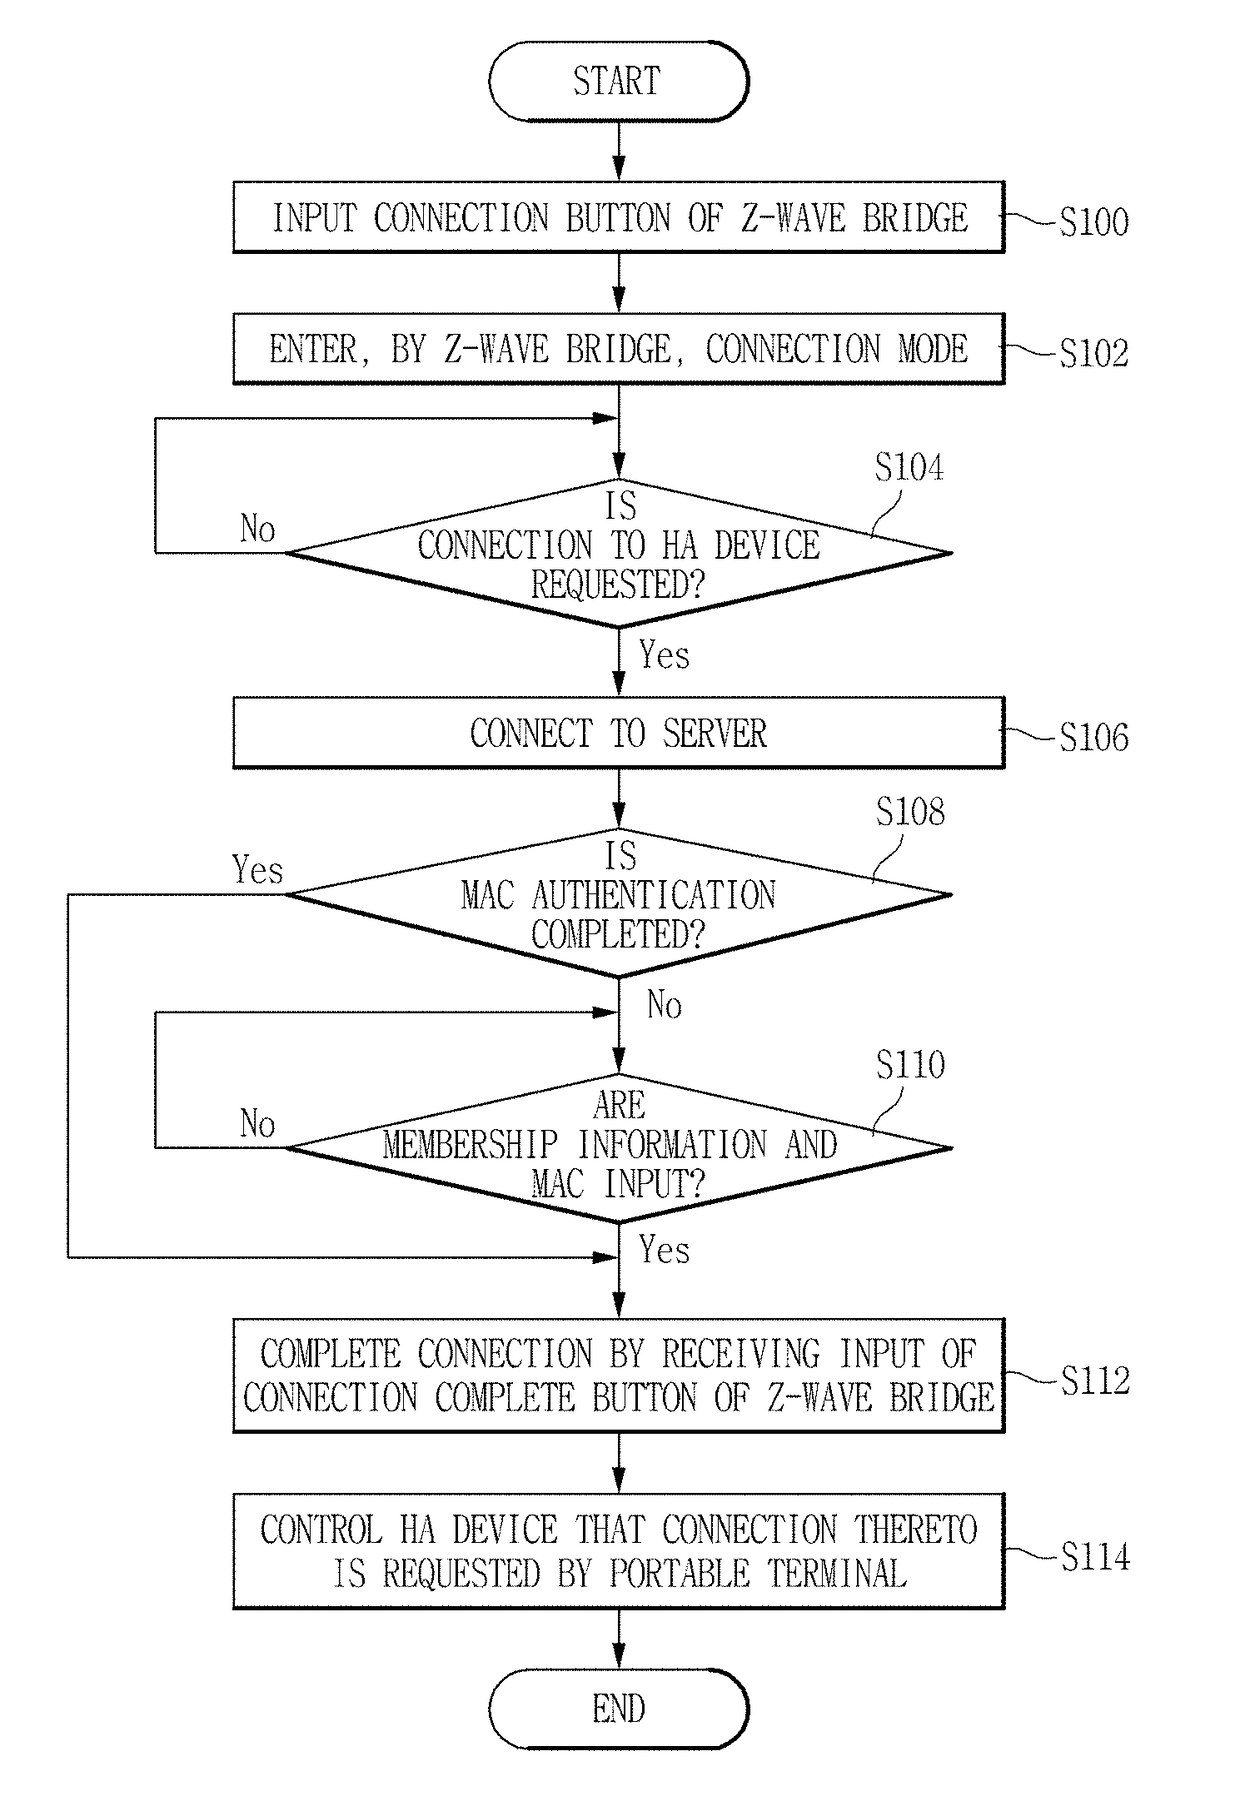 Home network system using z-wave network and home automation device connection method using same